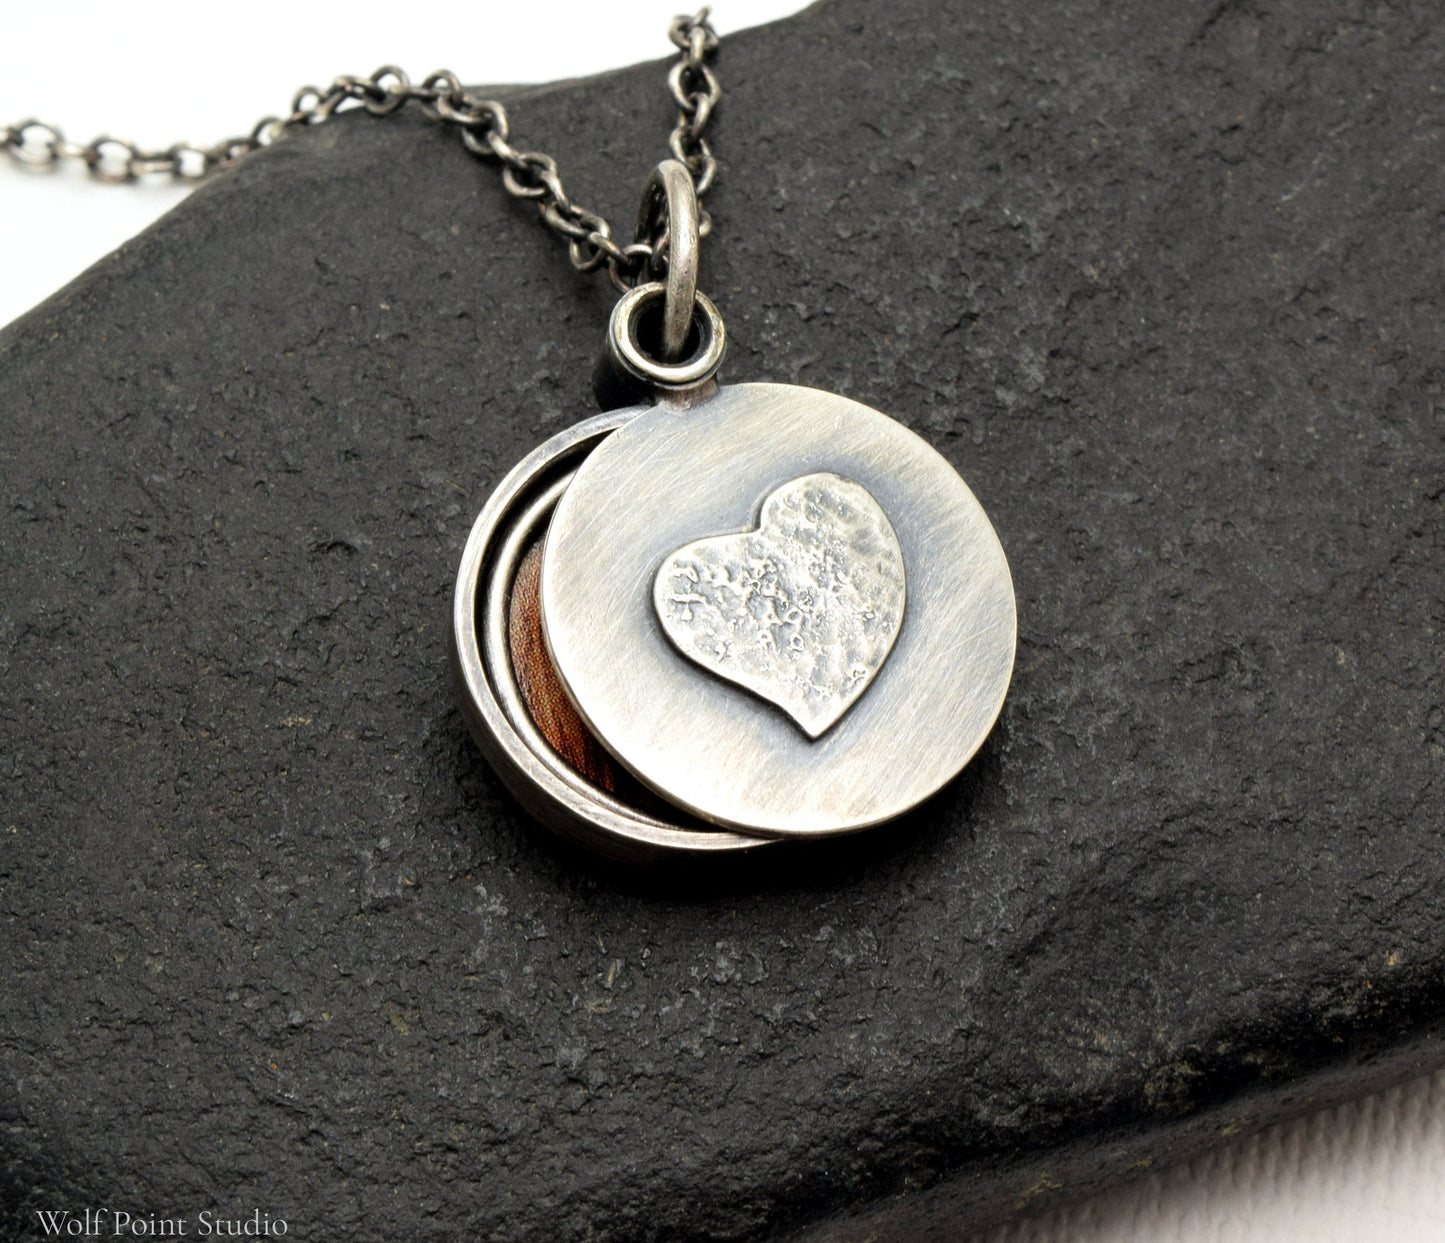 Rustic Heart Locket Sterling Silver Locket Necklace, Minimalist Photo Locket One Picture, Handmade Gift For Her, Love Locket Silver Jewelry